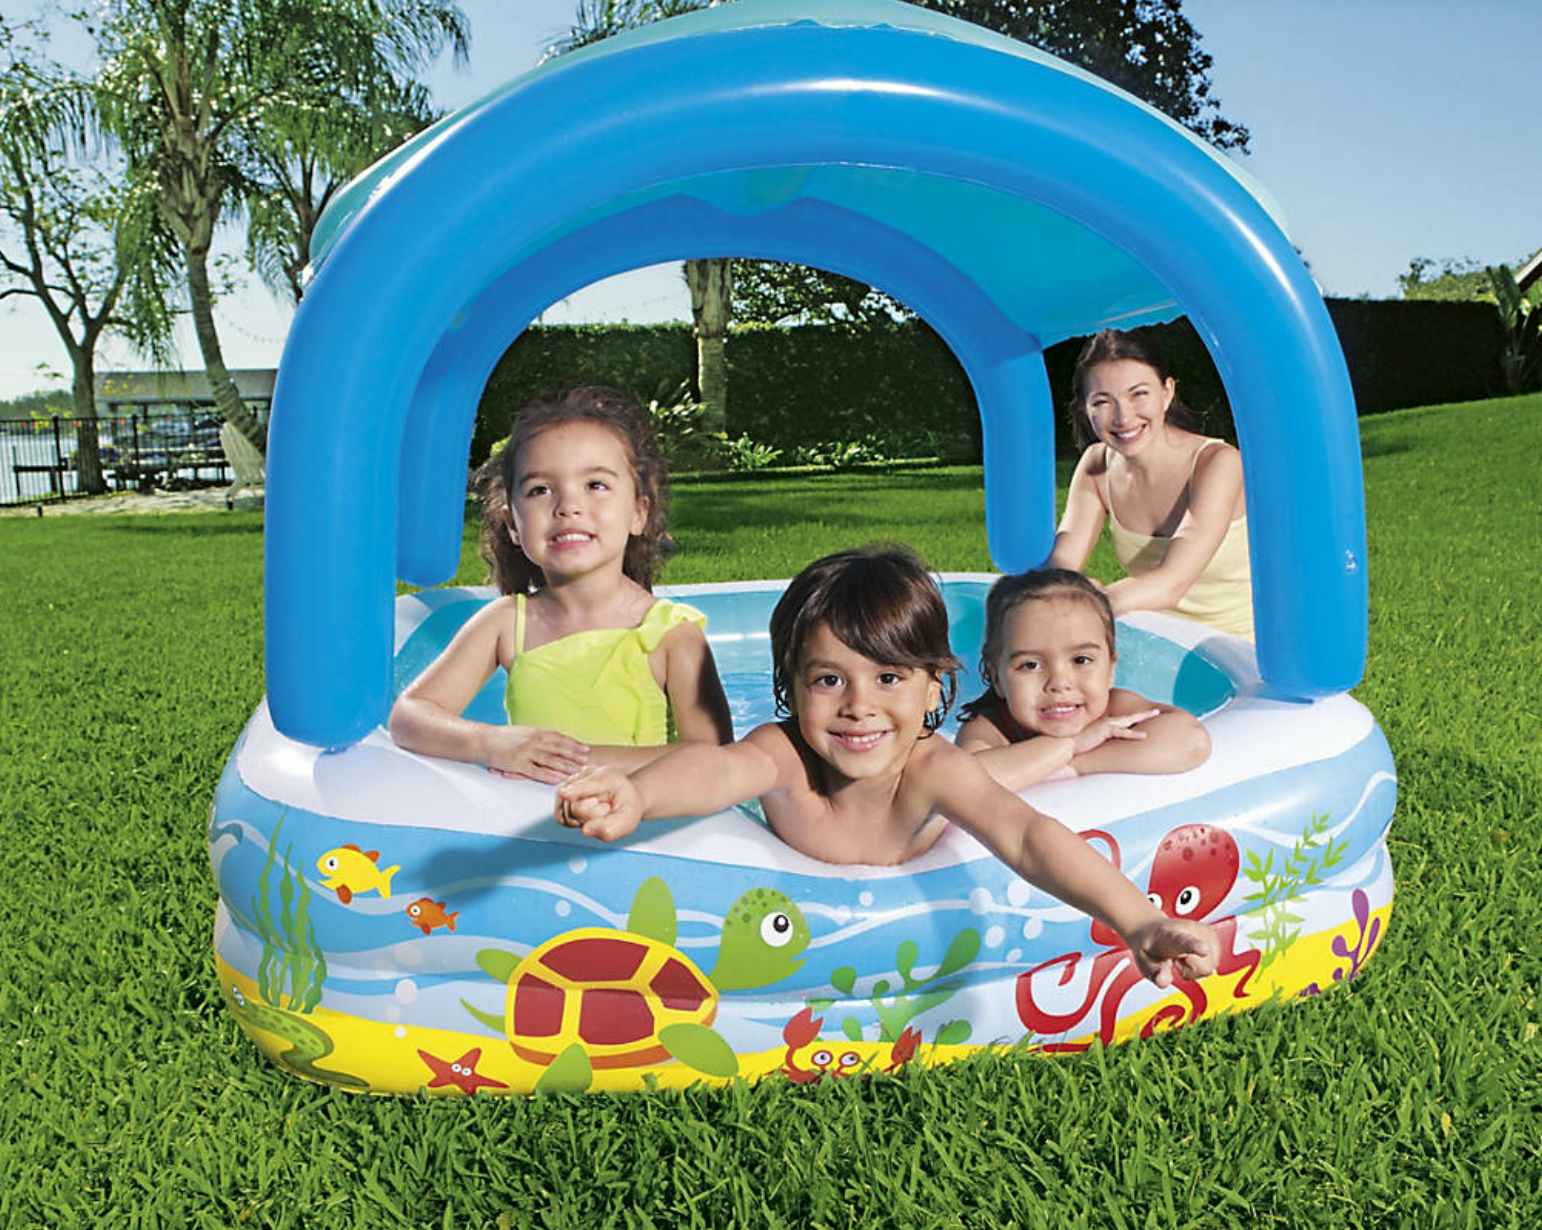 kids playing in an inflatable pool with a canopy